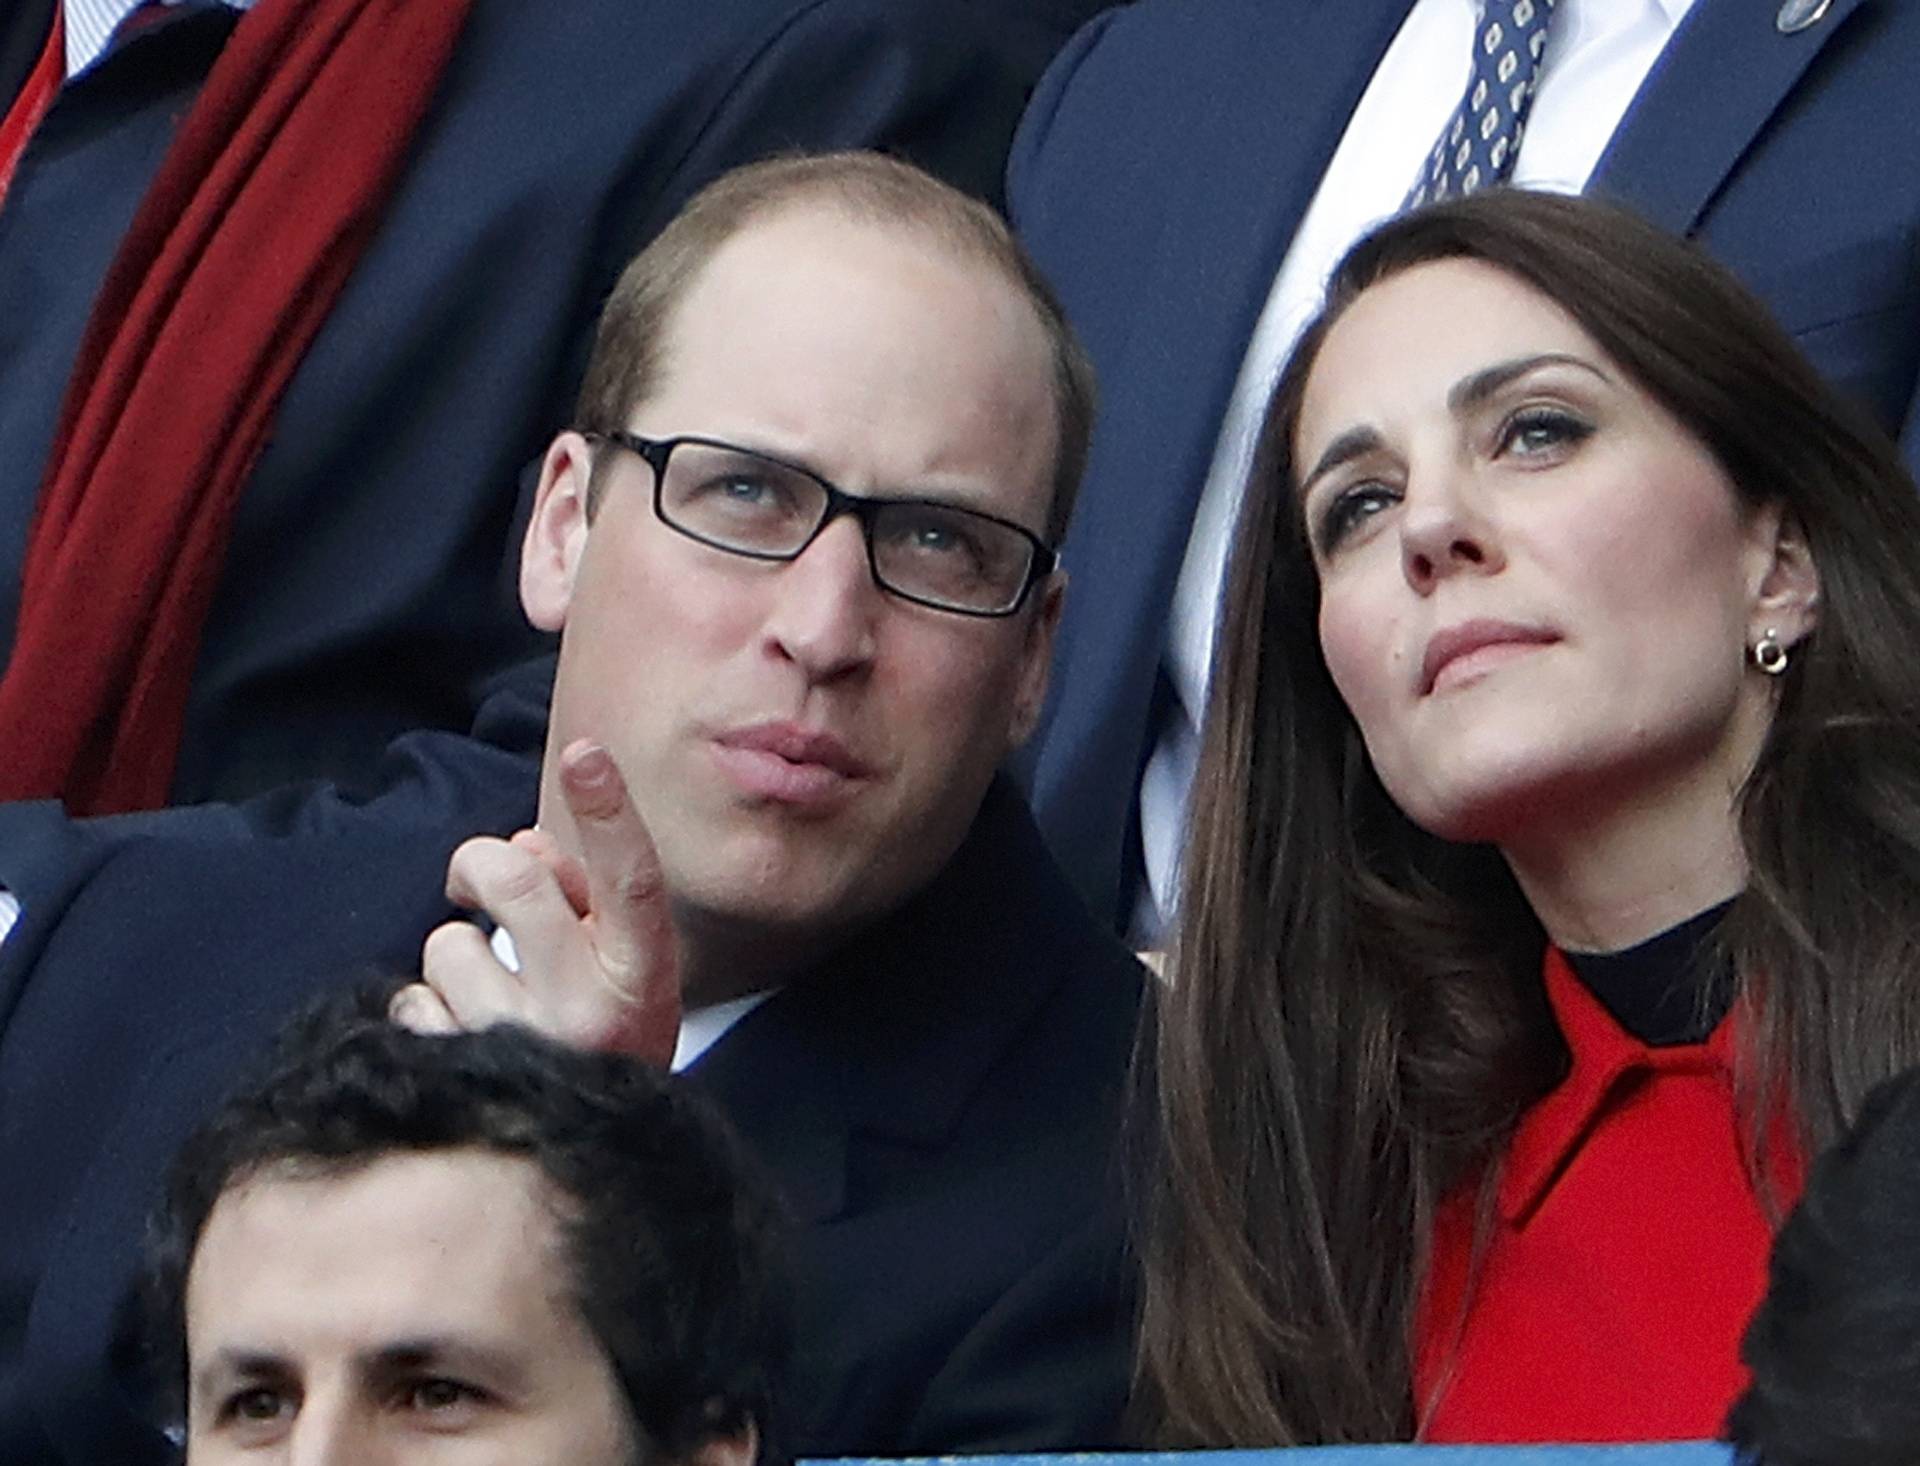 Britain's Catherine the Duchess of Cambridge and Prince William attend the Six Nations Championship match between France and Wales at the Stade de France stadium in Saint-Denis near Paris